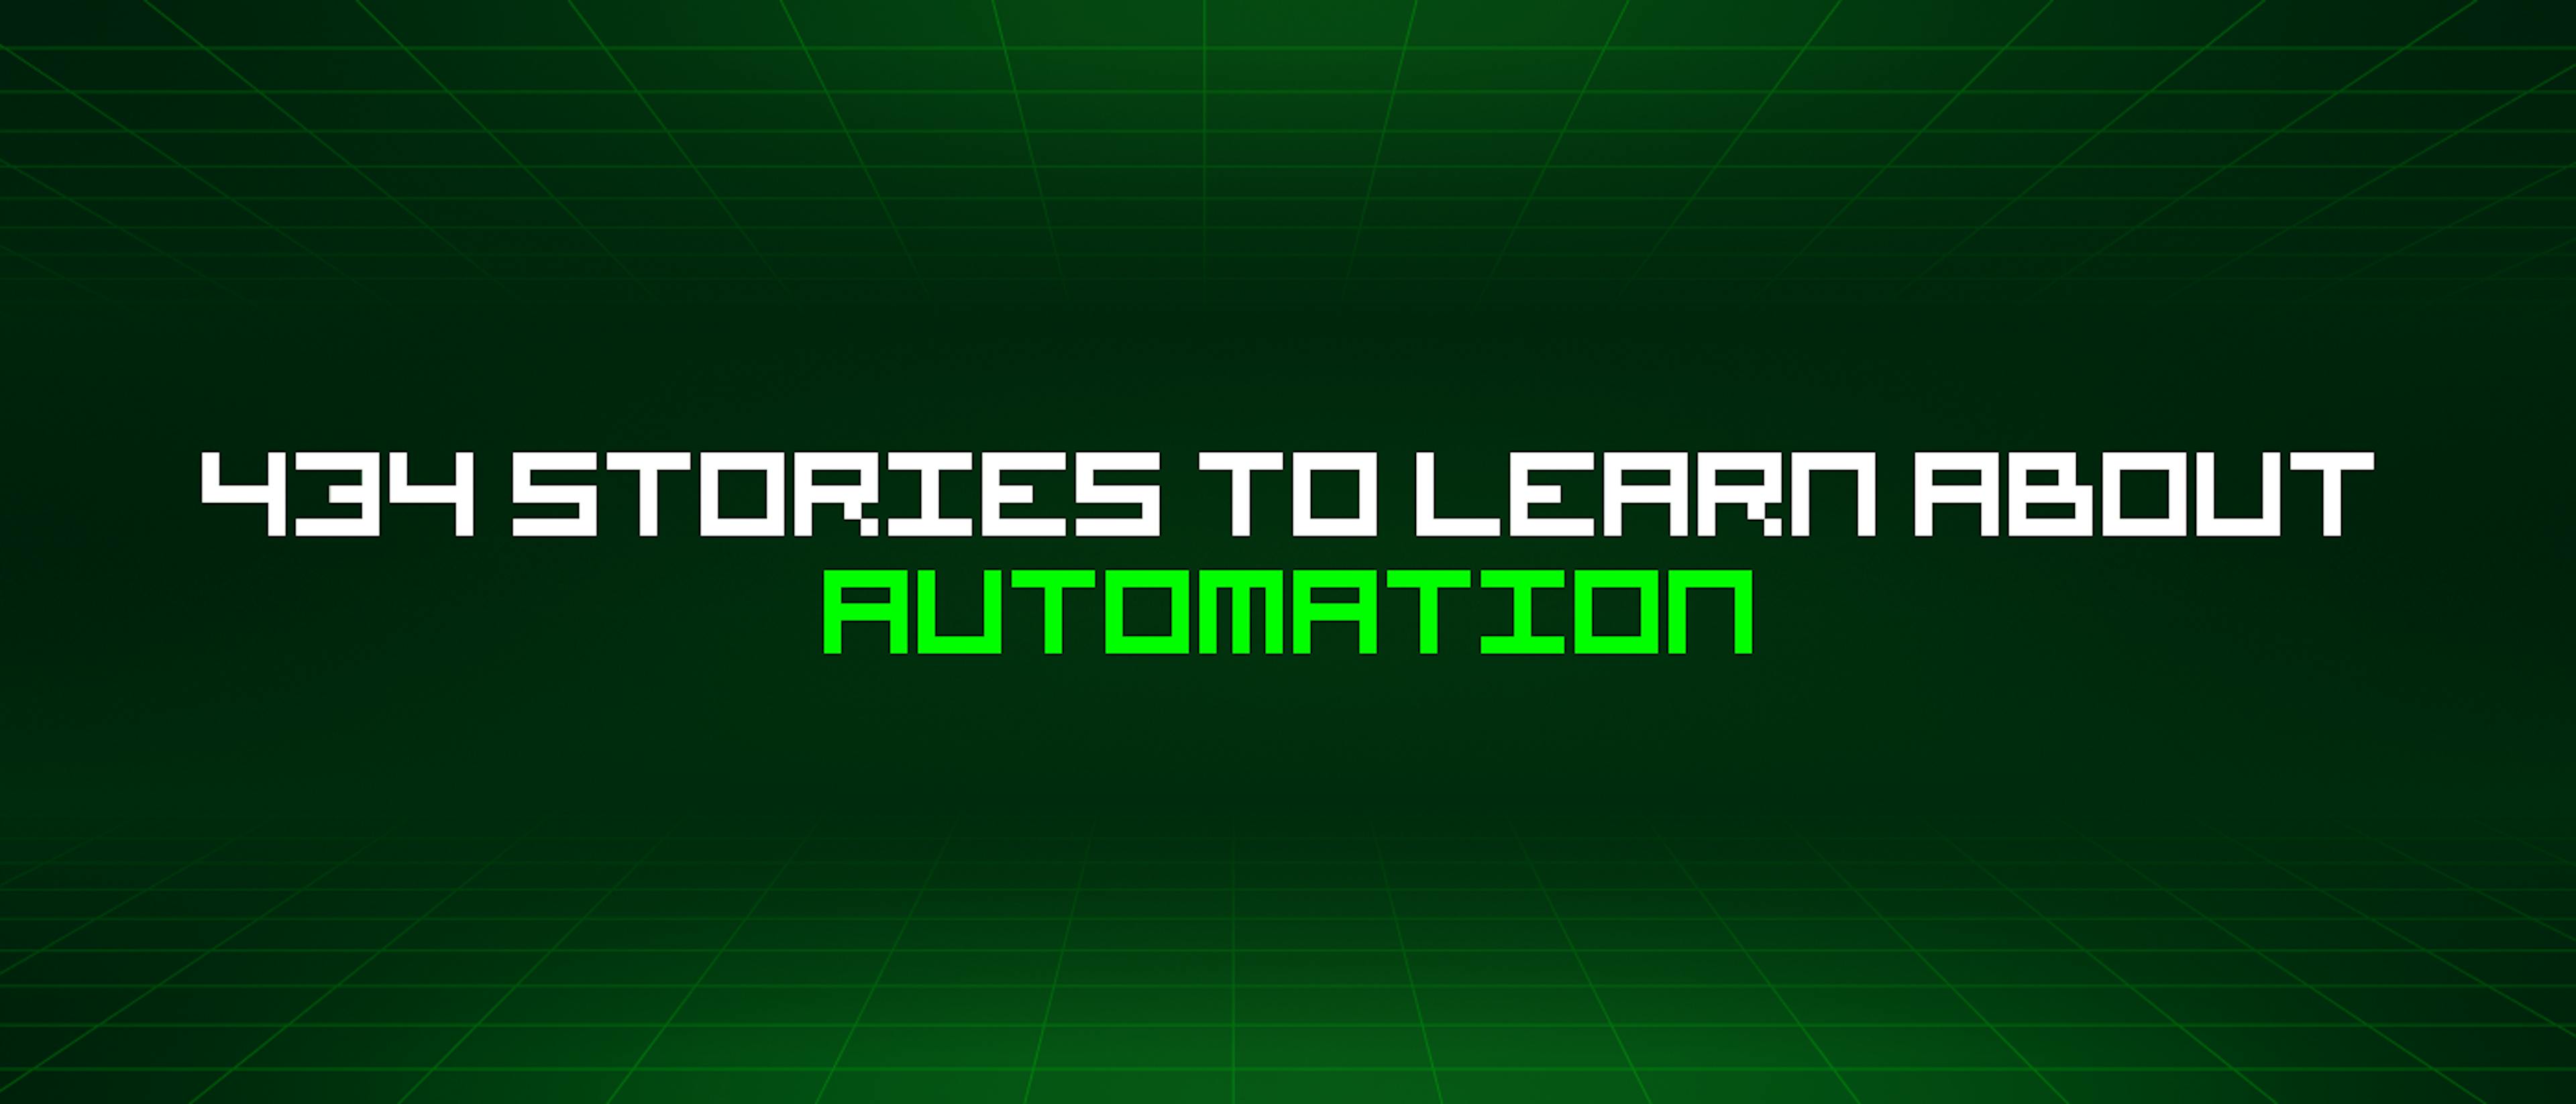 /434-stories-to-learn-about-automation feature image